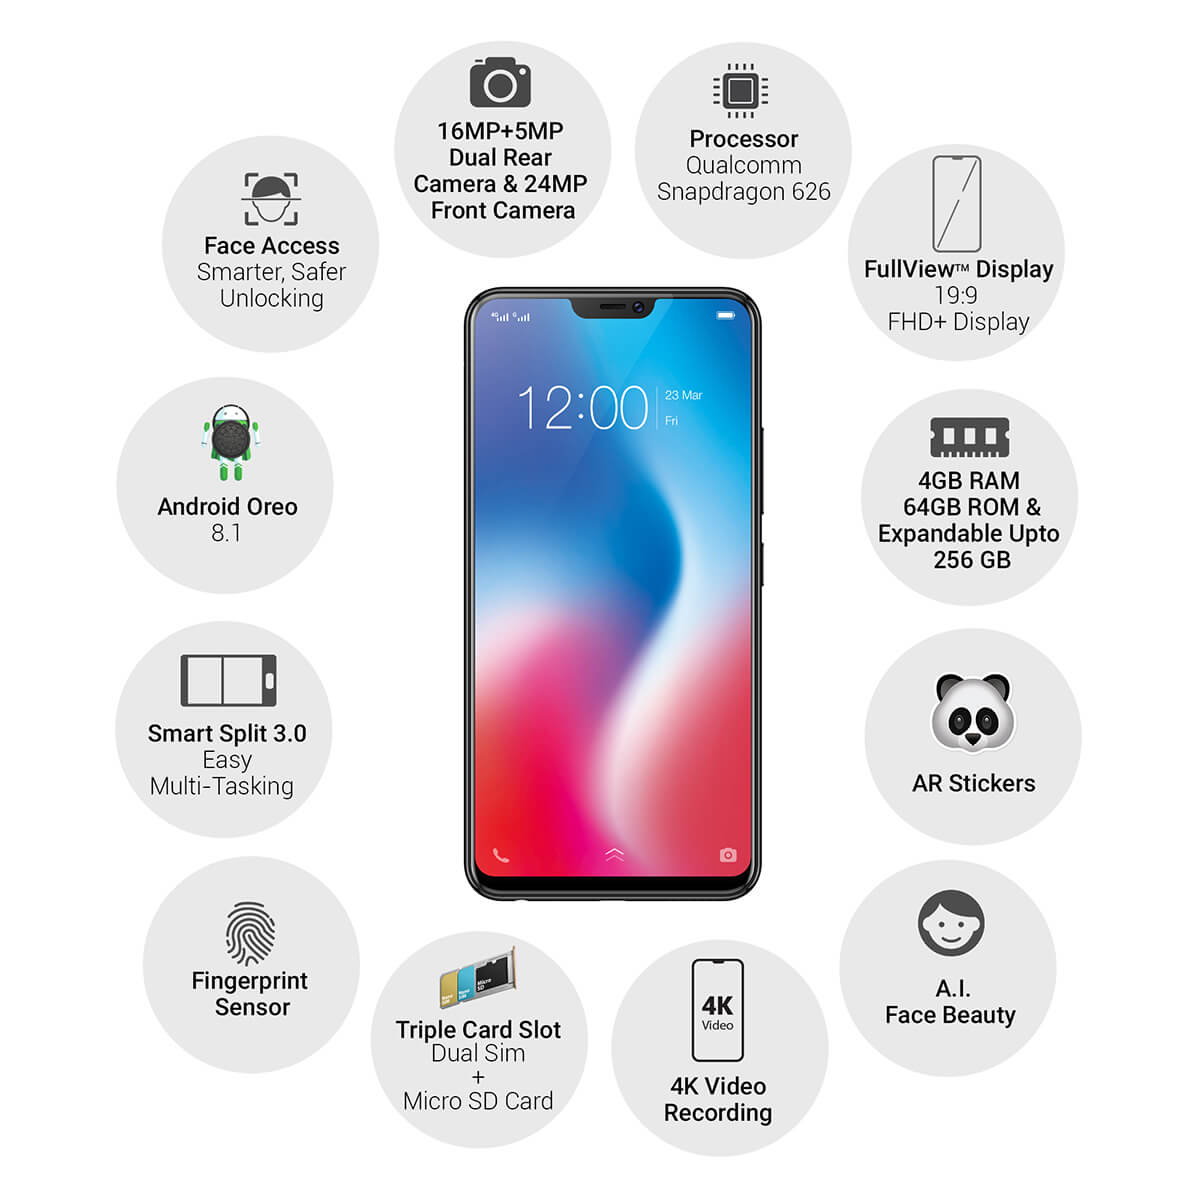 Vivo V9 Official Image Showing All Features